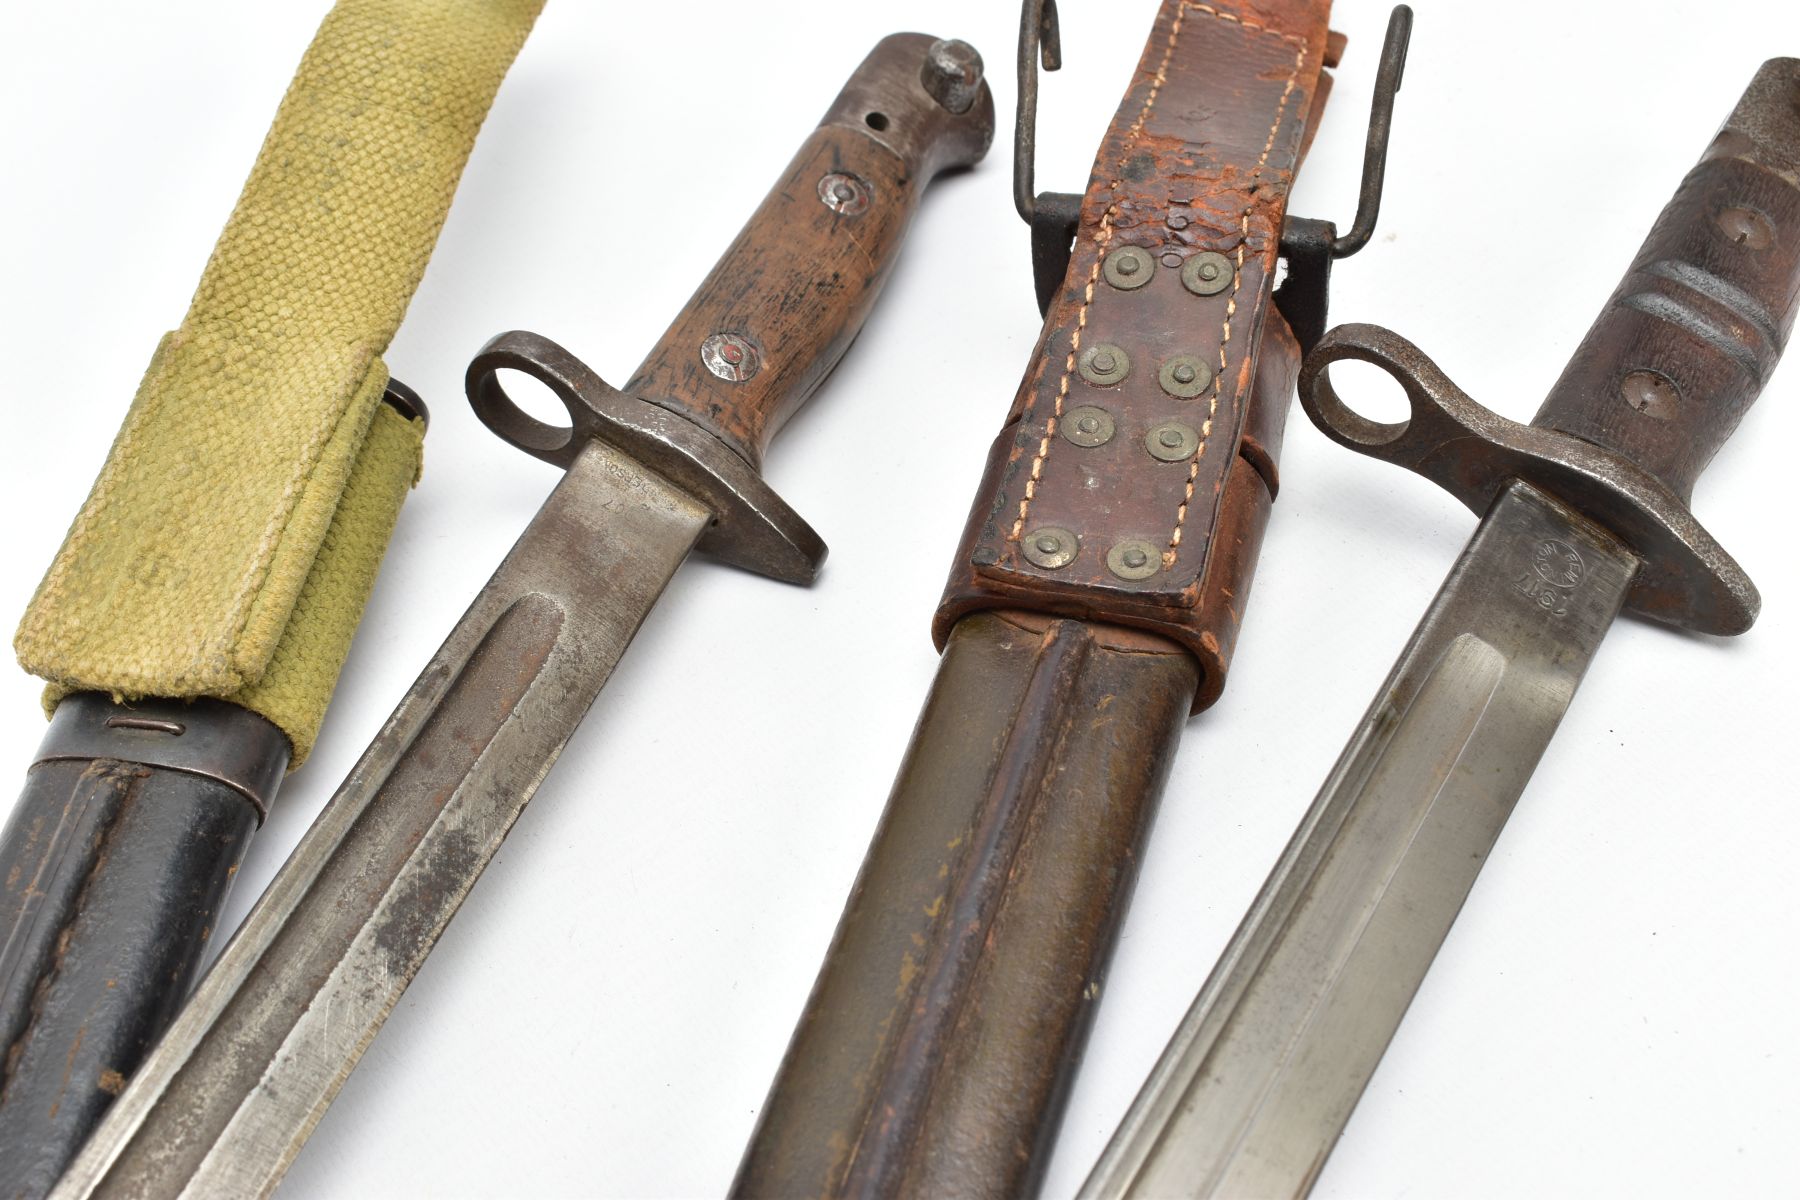 TWO WORLD WAR 1/2 RIFLE BAYONETS AND SCABBARDS, to include US Army 1917 pattern Remington brand - Image 9 of 10